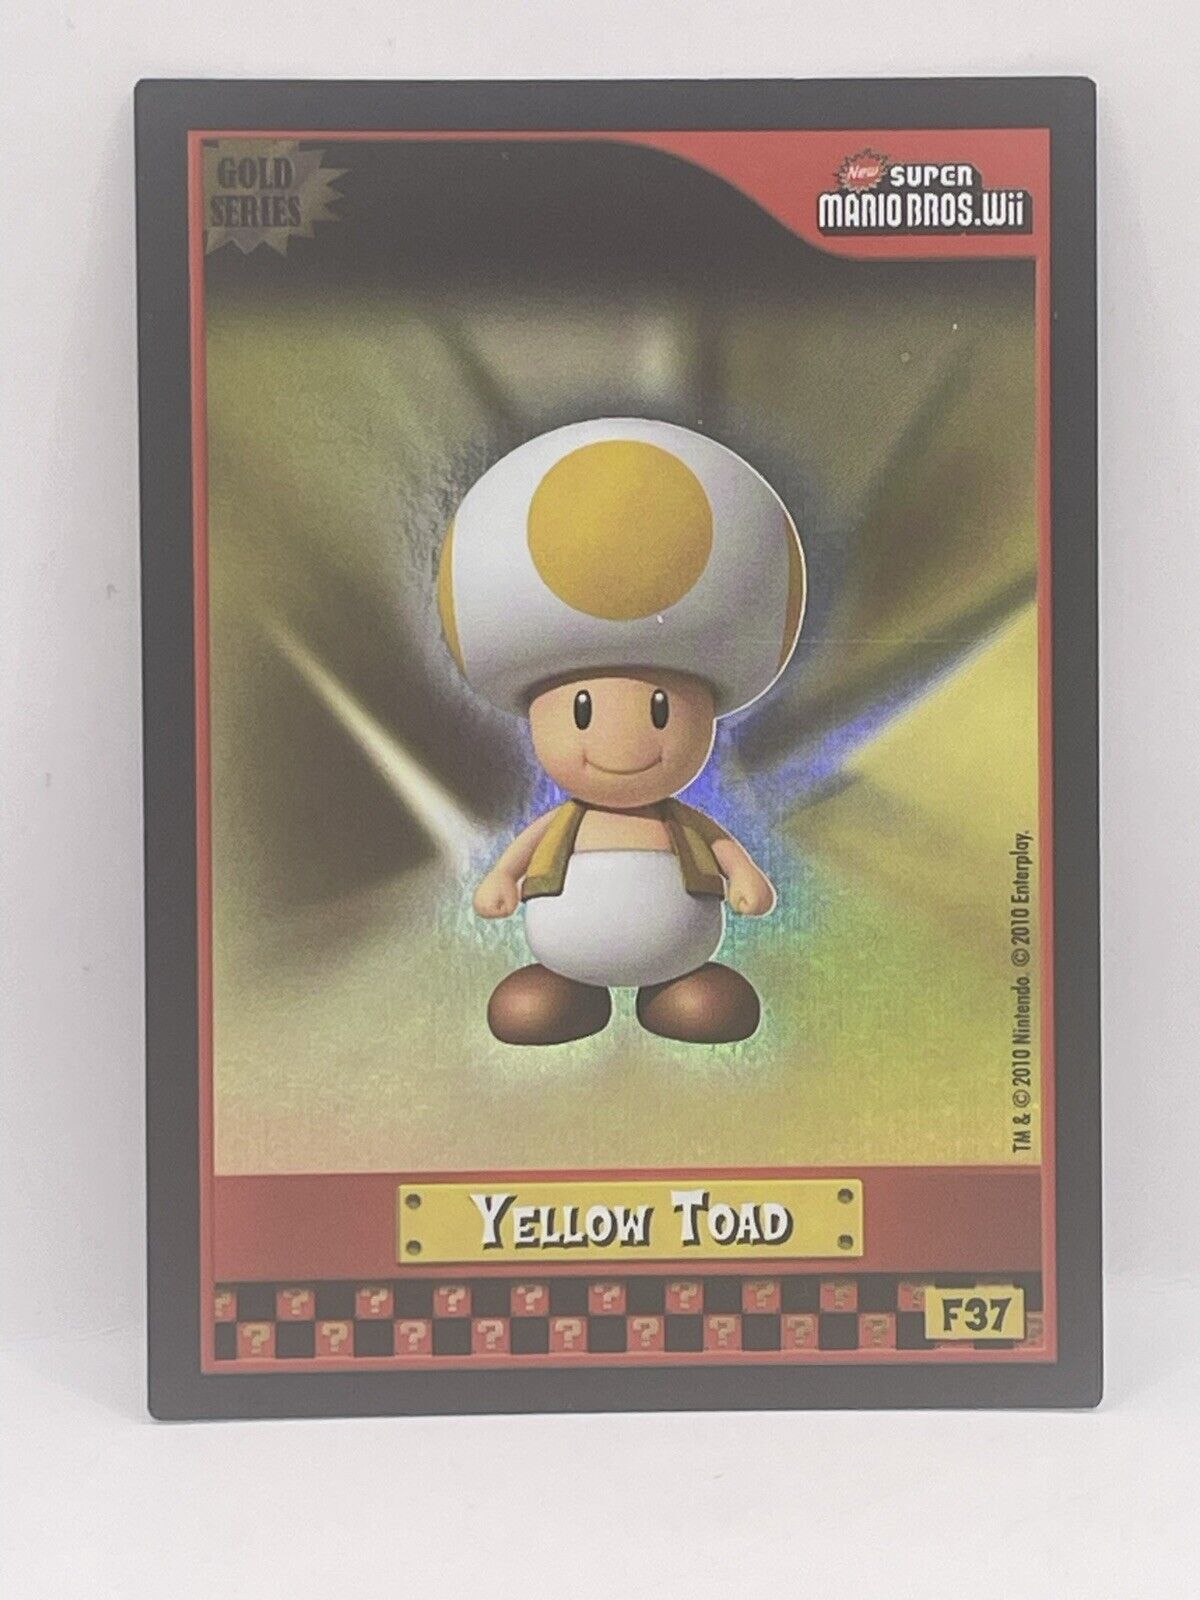 2010 Enterplay Super Mario Bros Wii Trading Card - GOLD SERIES YELLOW TOAD F37